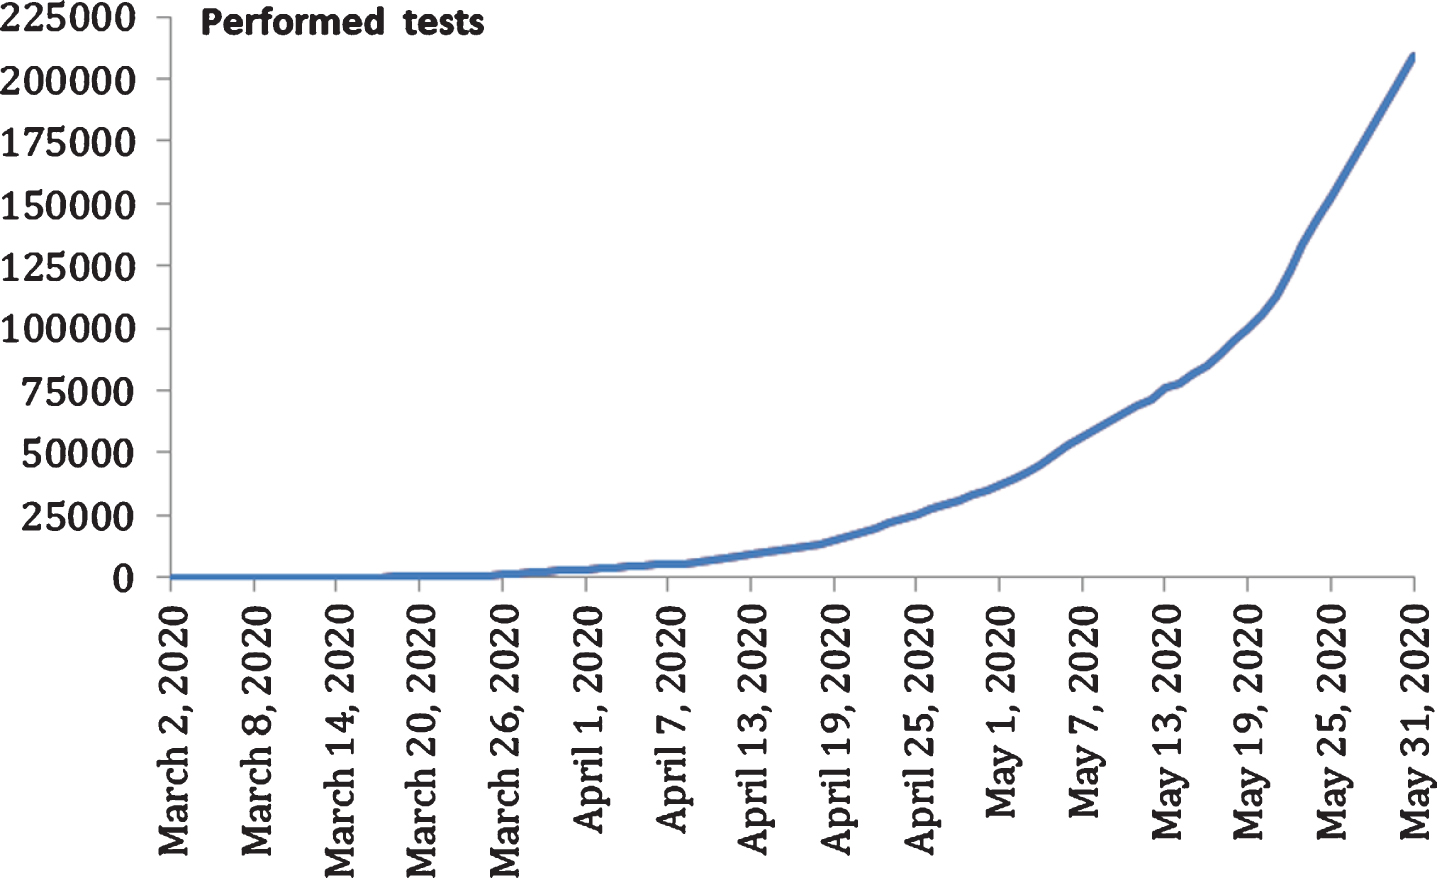 Evolution of number of performed tests of COVID-19 in Morocco.